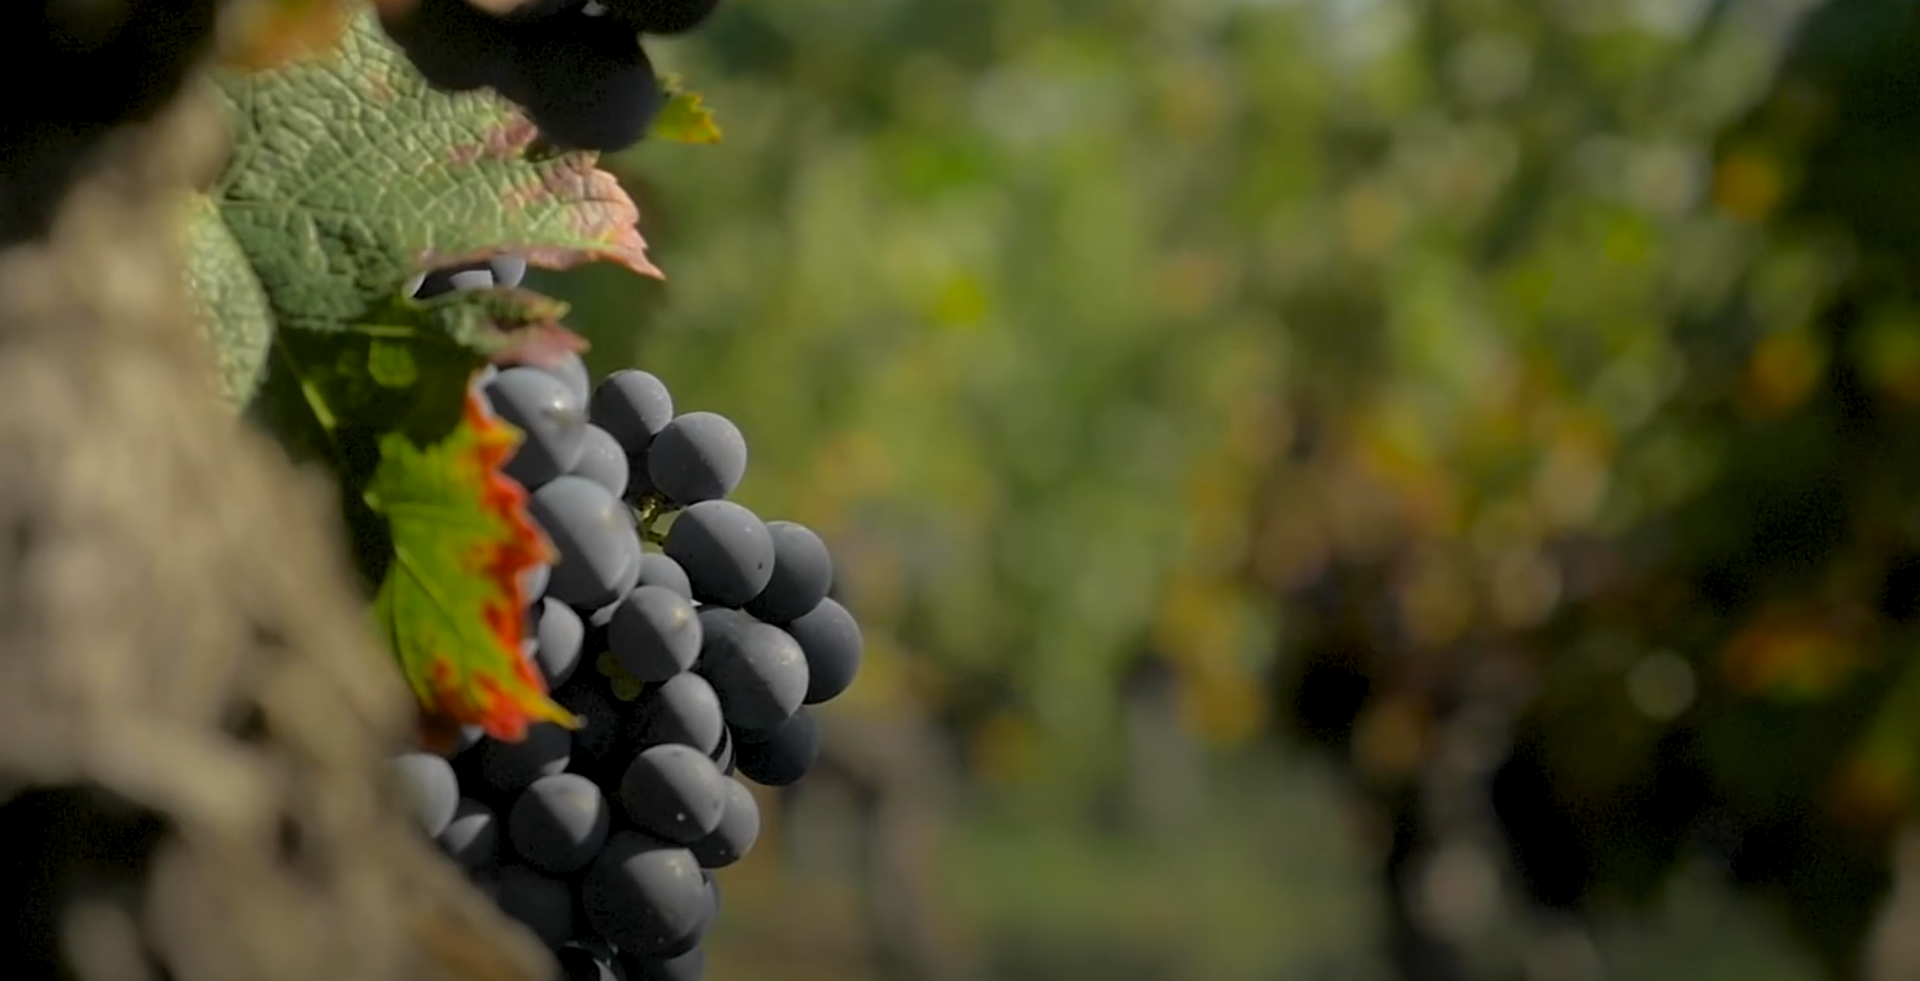 Where Does Wine Come From?